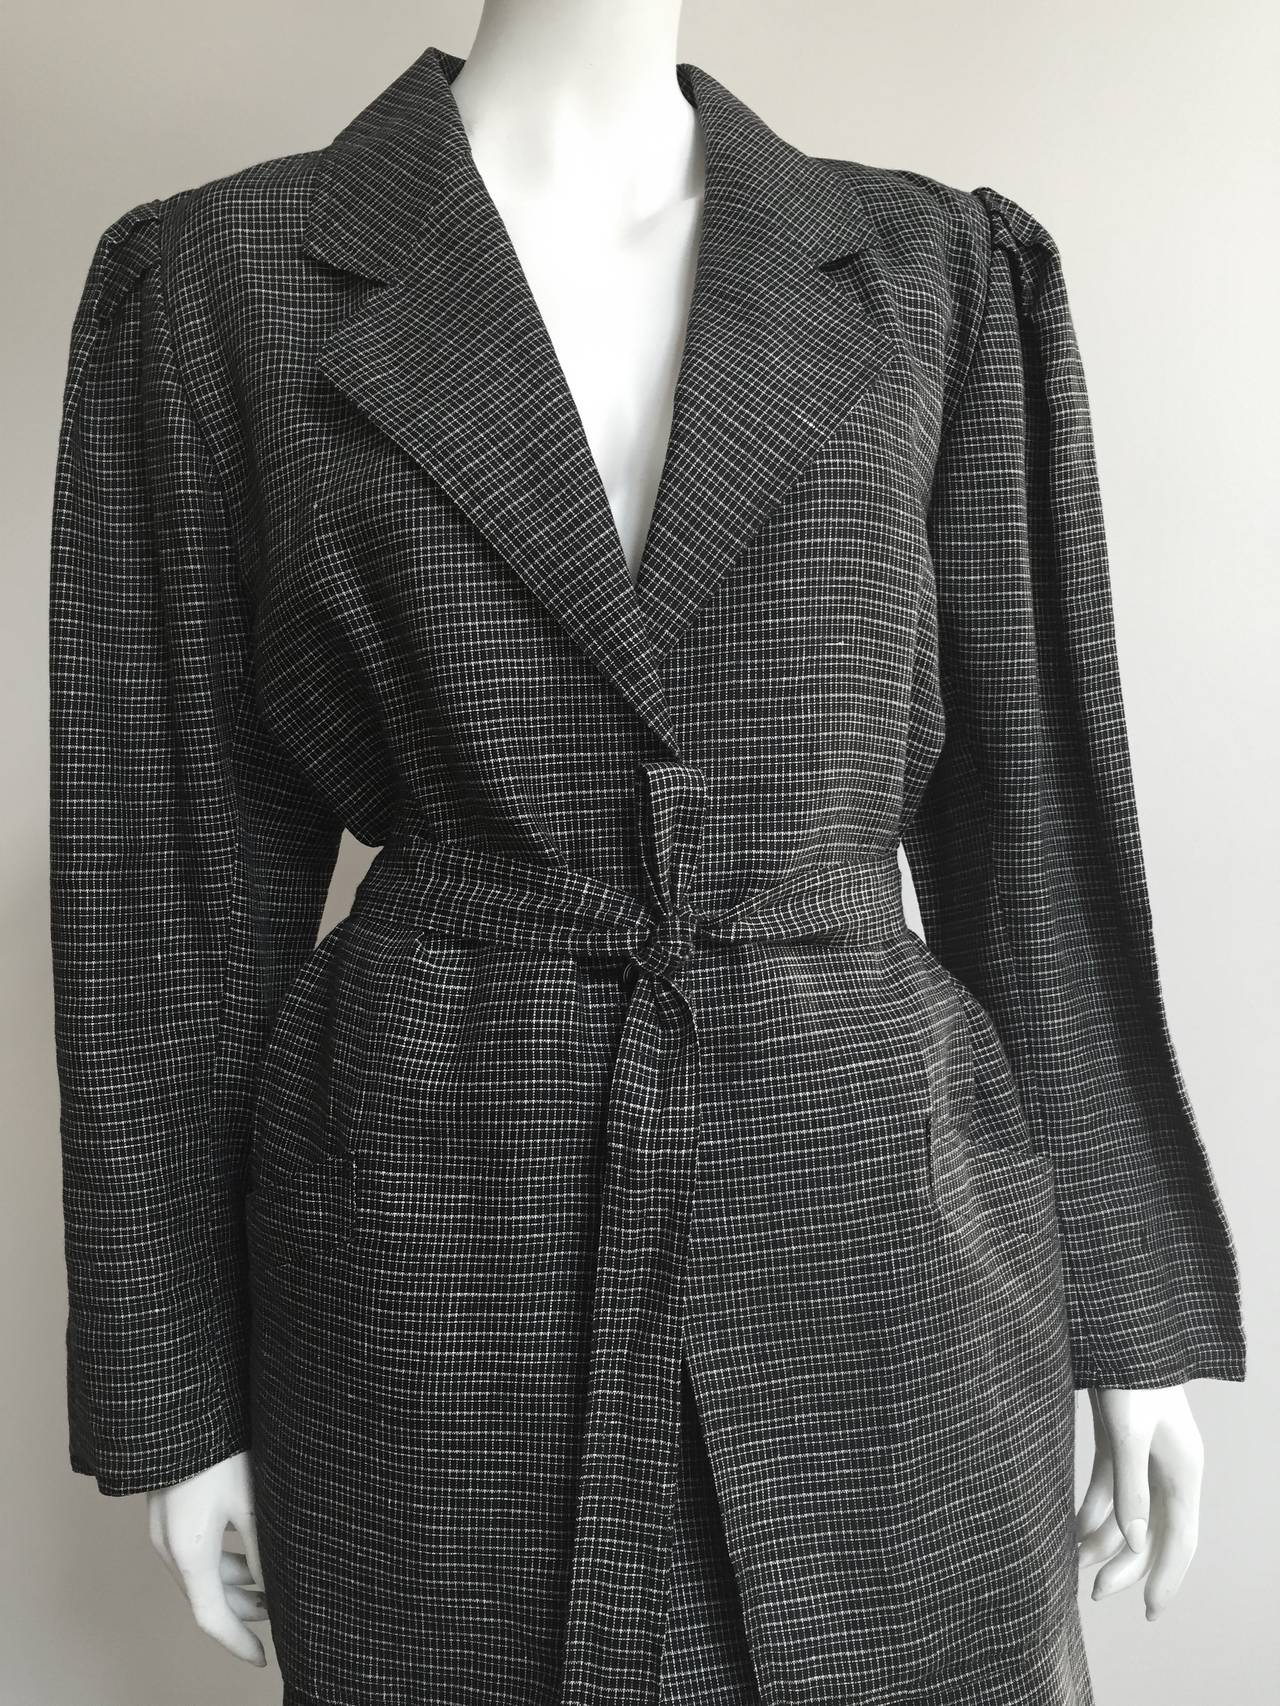 Ungaro Solo Donna 1980s linen 3 piece linen skirt suit with pockets & belt set is an Italian size 46 (jacket) and size 44 (skirt) but fits like a modern USA size 6.  Please use the measurements I provide you so that when you take your tape